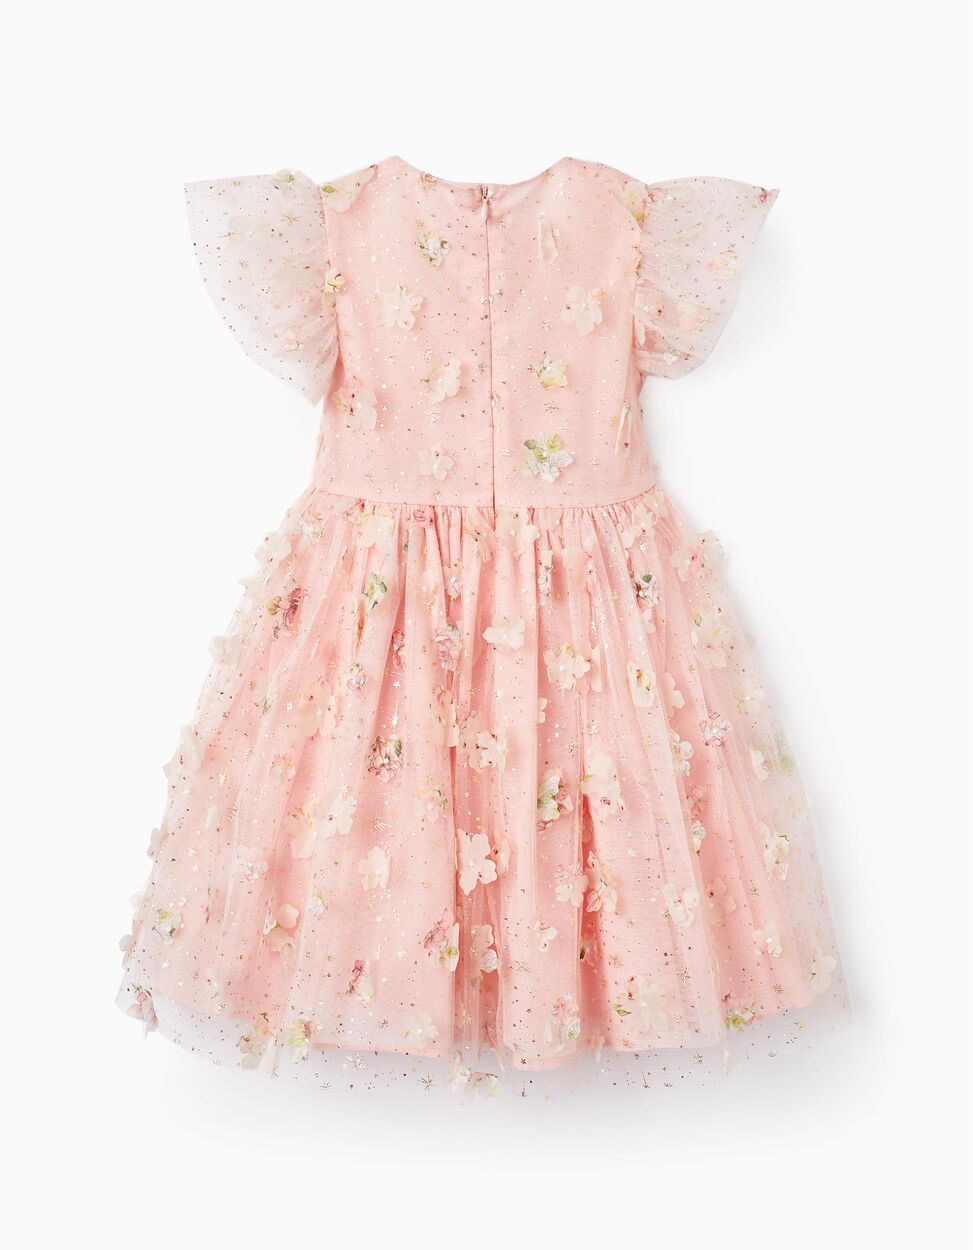 Buy Online Tulle Dress with Flowers for Girls, Pink